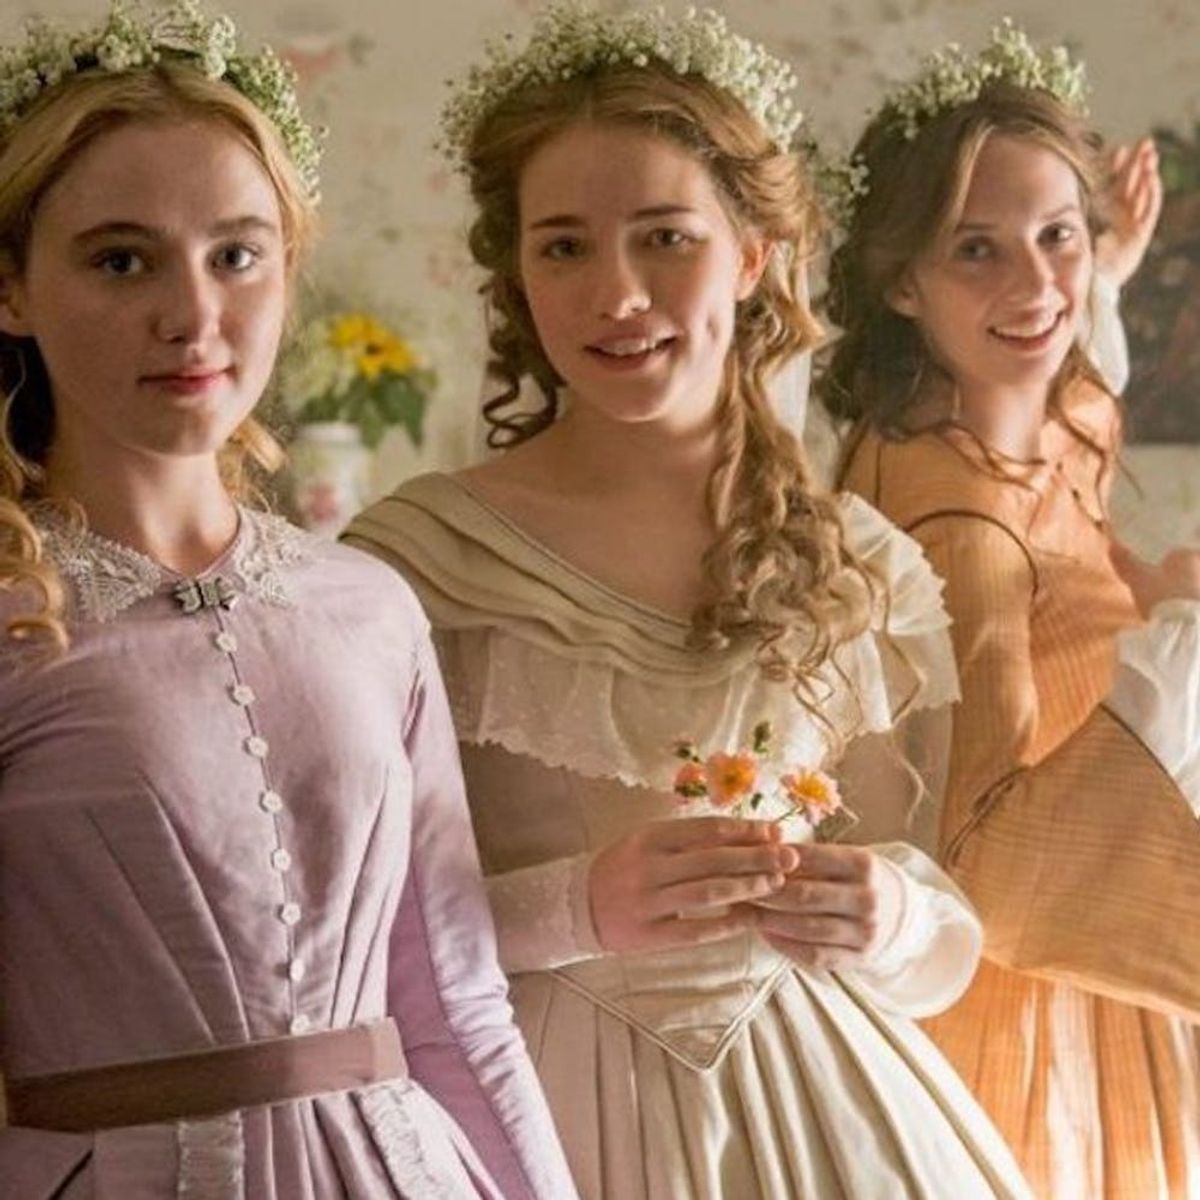 Here’s Your First Look at the PBS Adaptation of “Little Women”